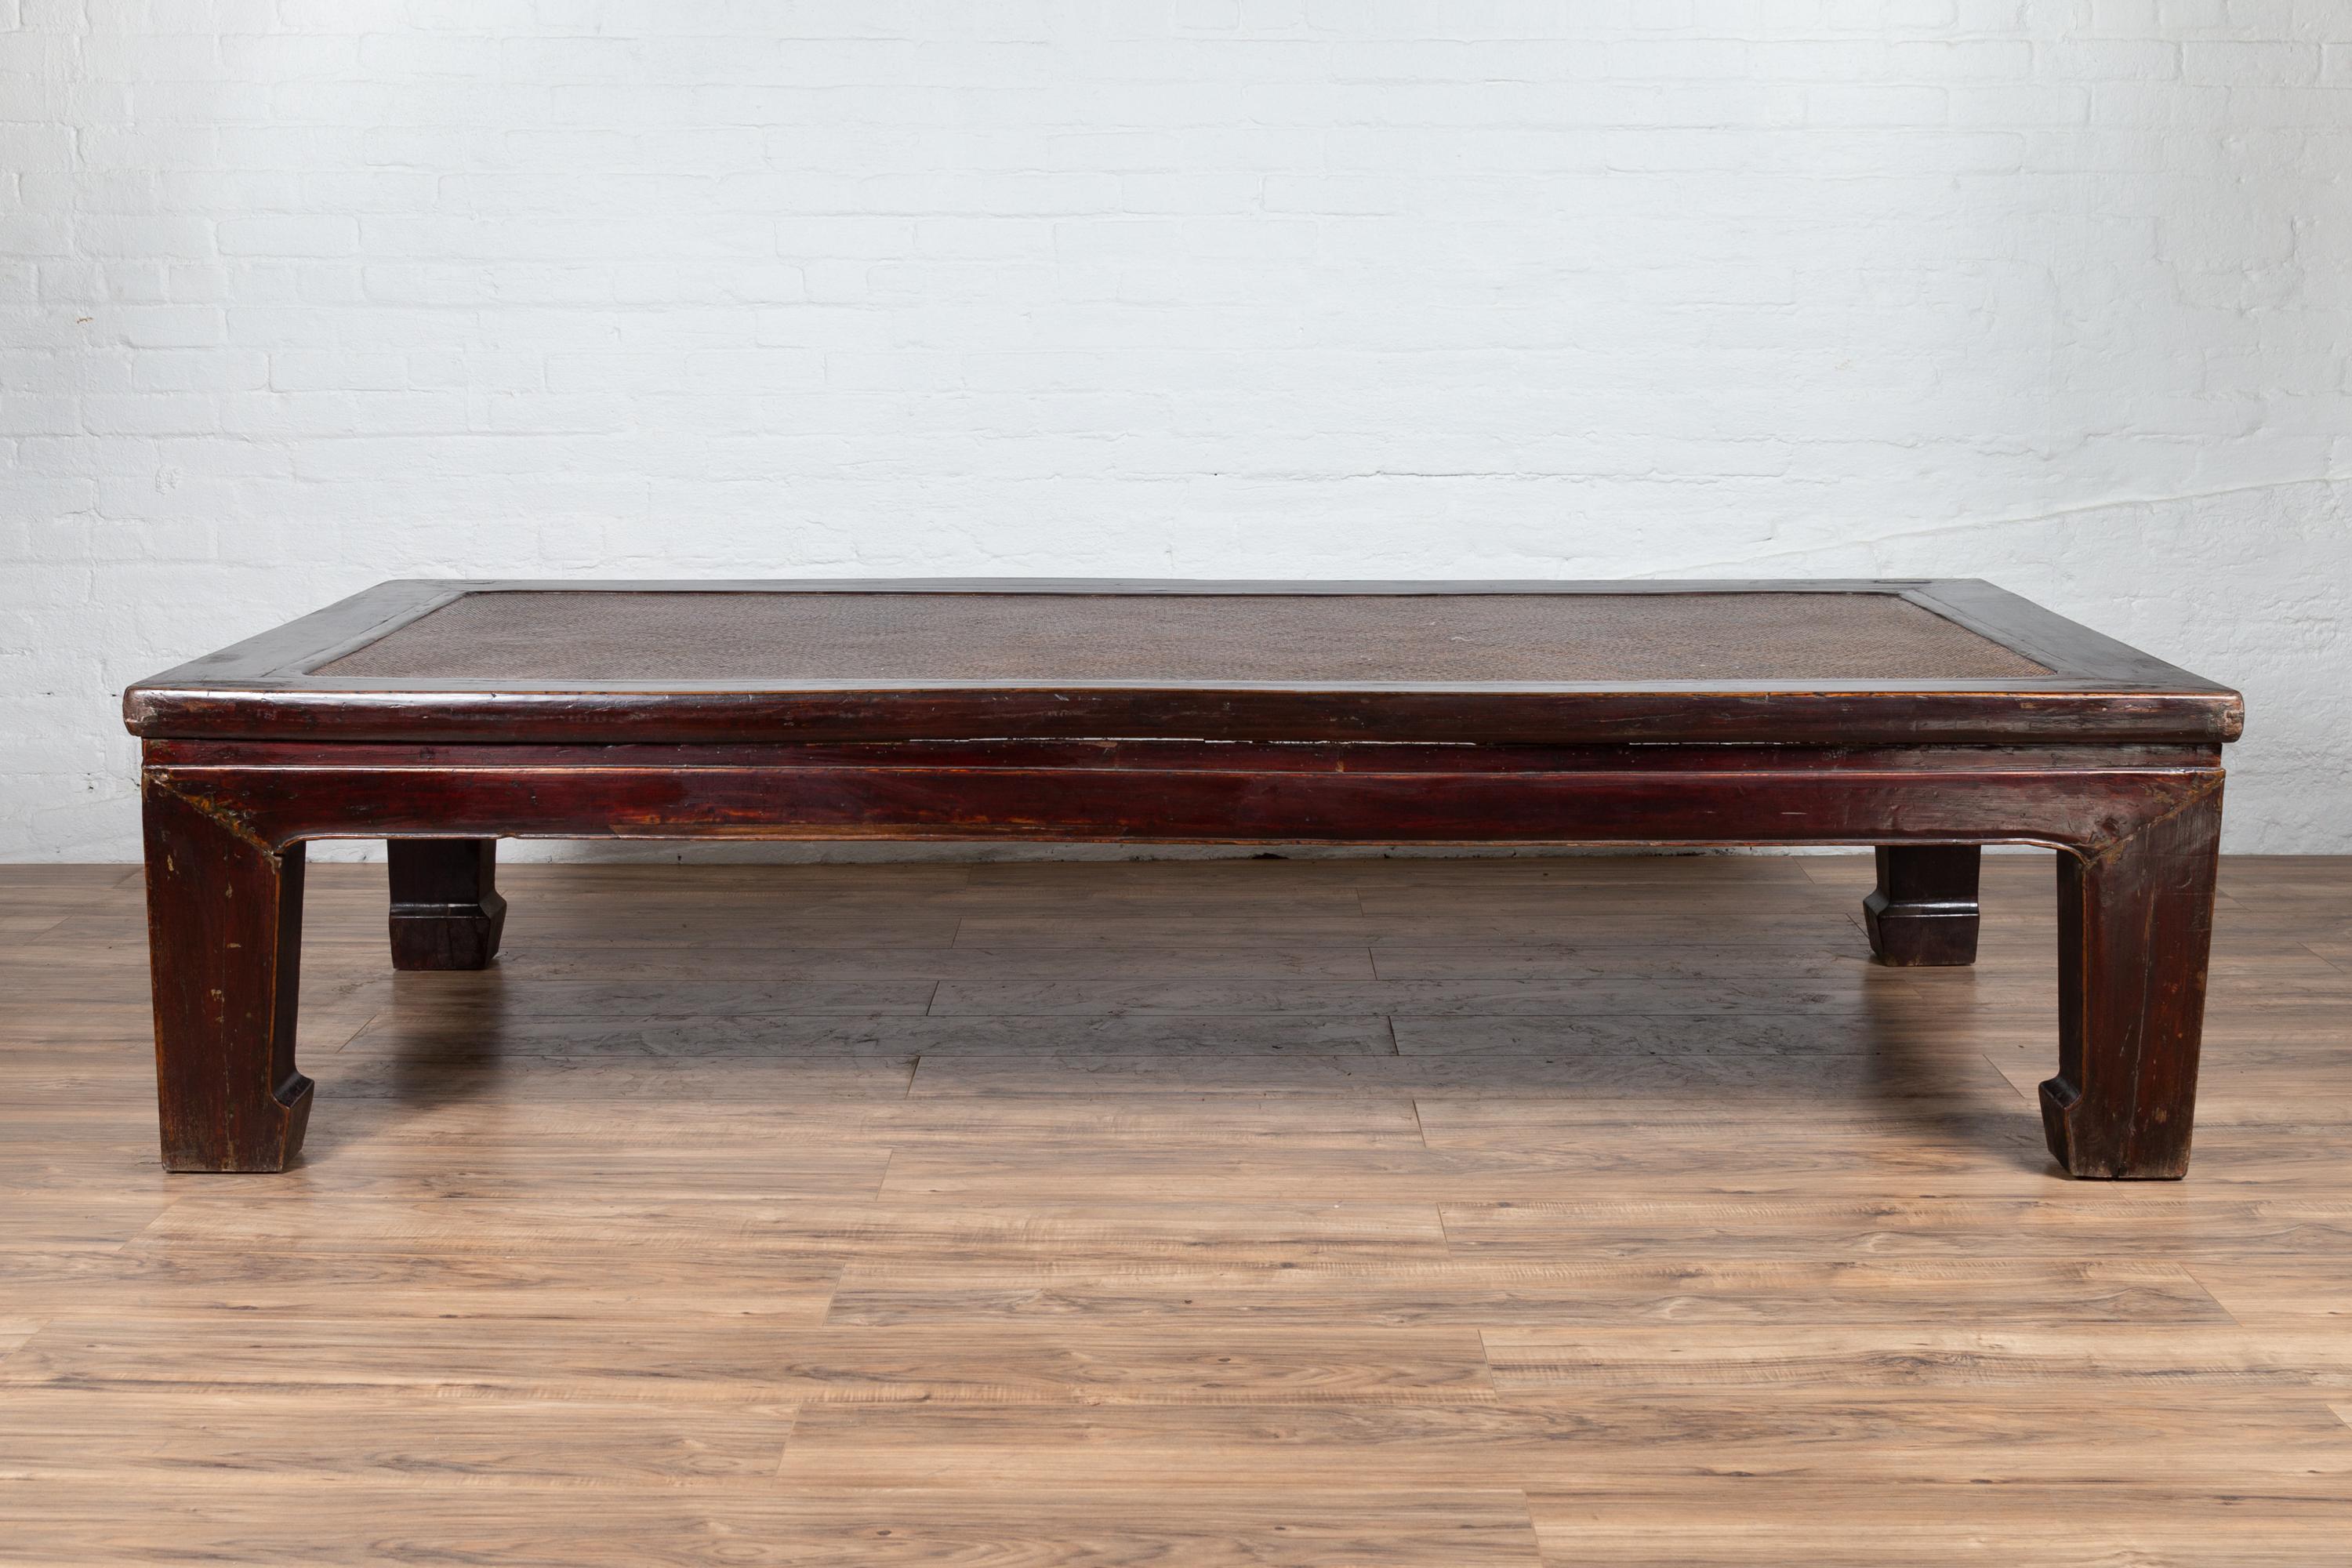 An antique Chinese wooden coffee table from the early 20th century, with dark burgundy patina, woven rattan top and sturdy horse hoofed legs. Born in China during the early years of the 20th century, this charming coffee table, originally created to